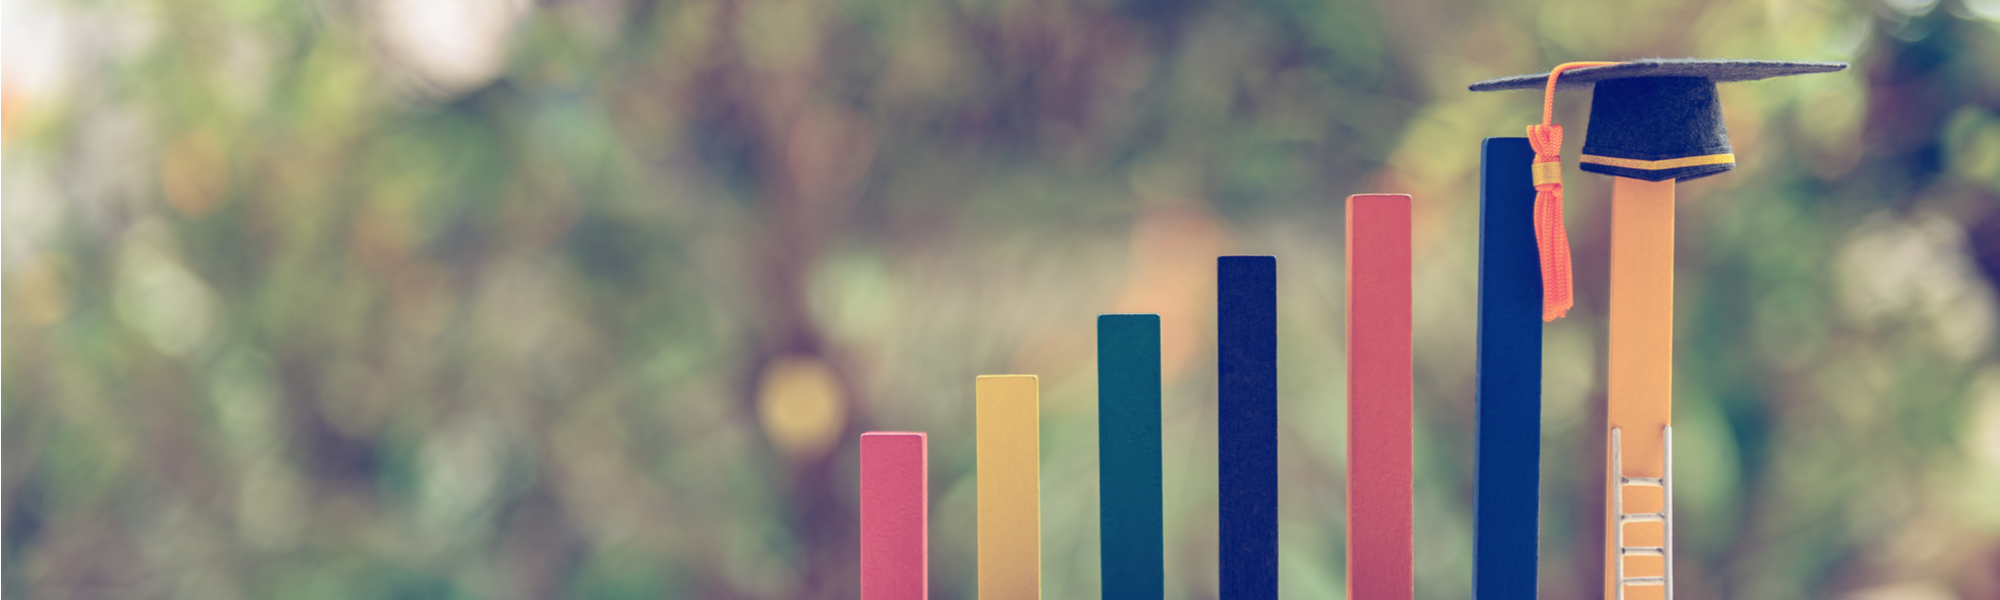 A series of coloured sticks of different height in ascending order on a blurred background